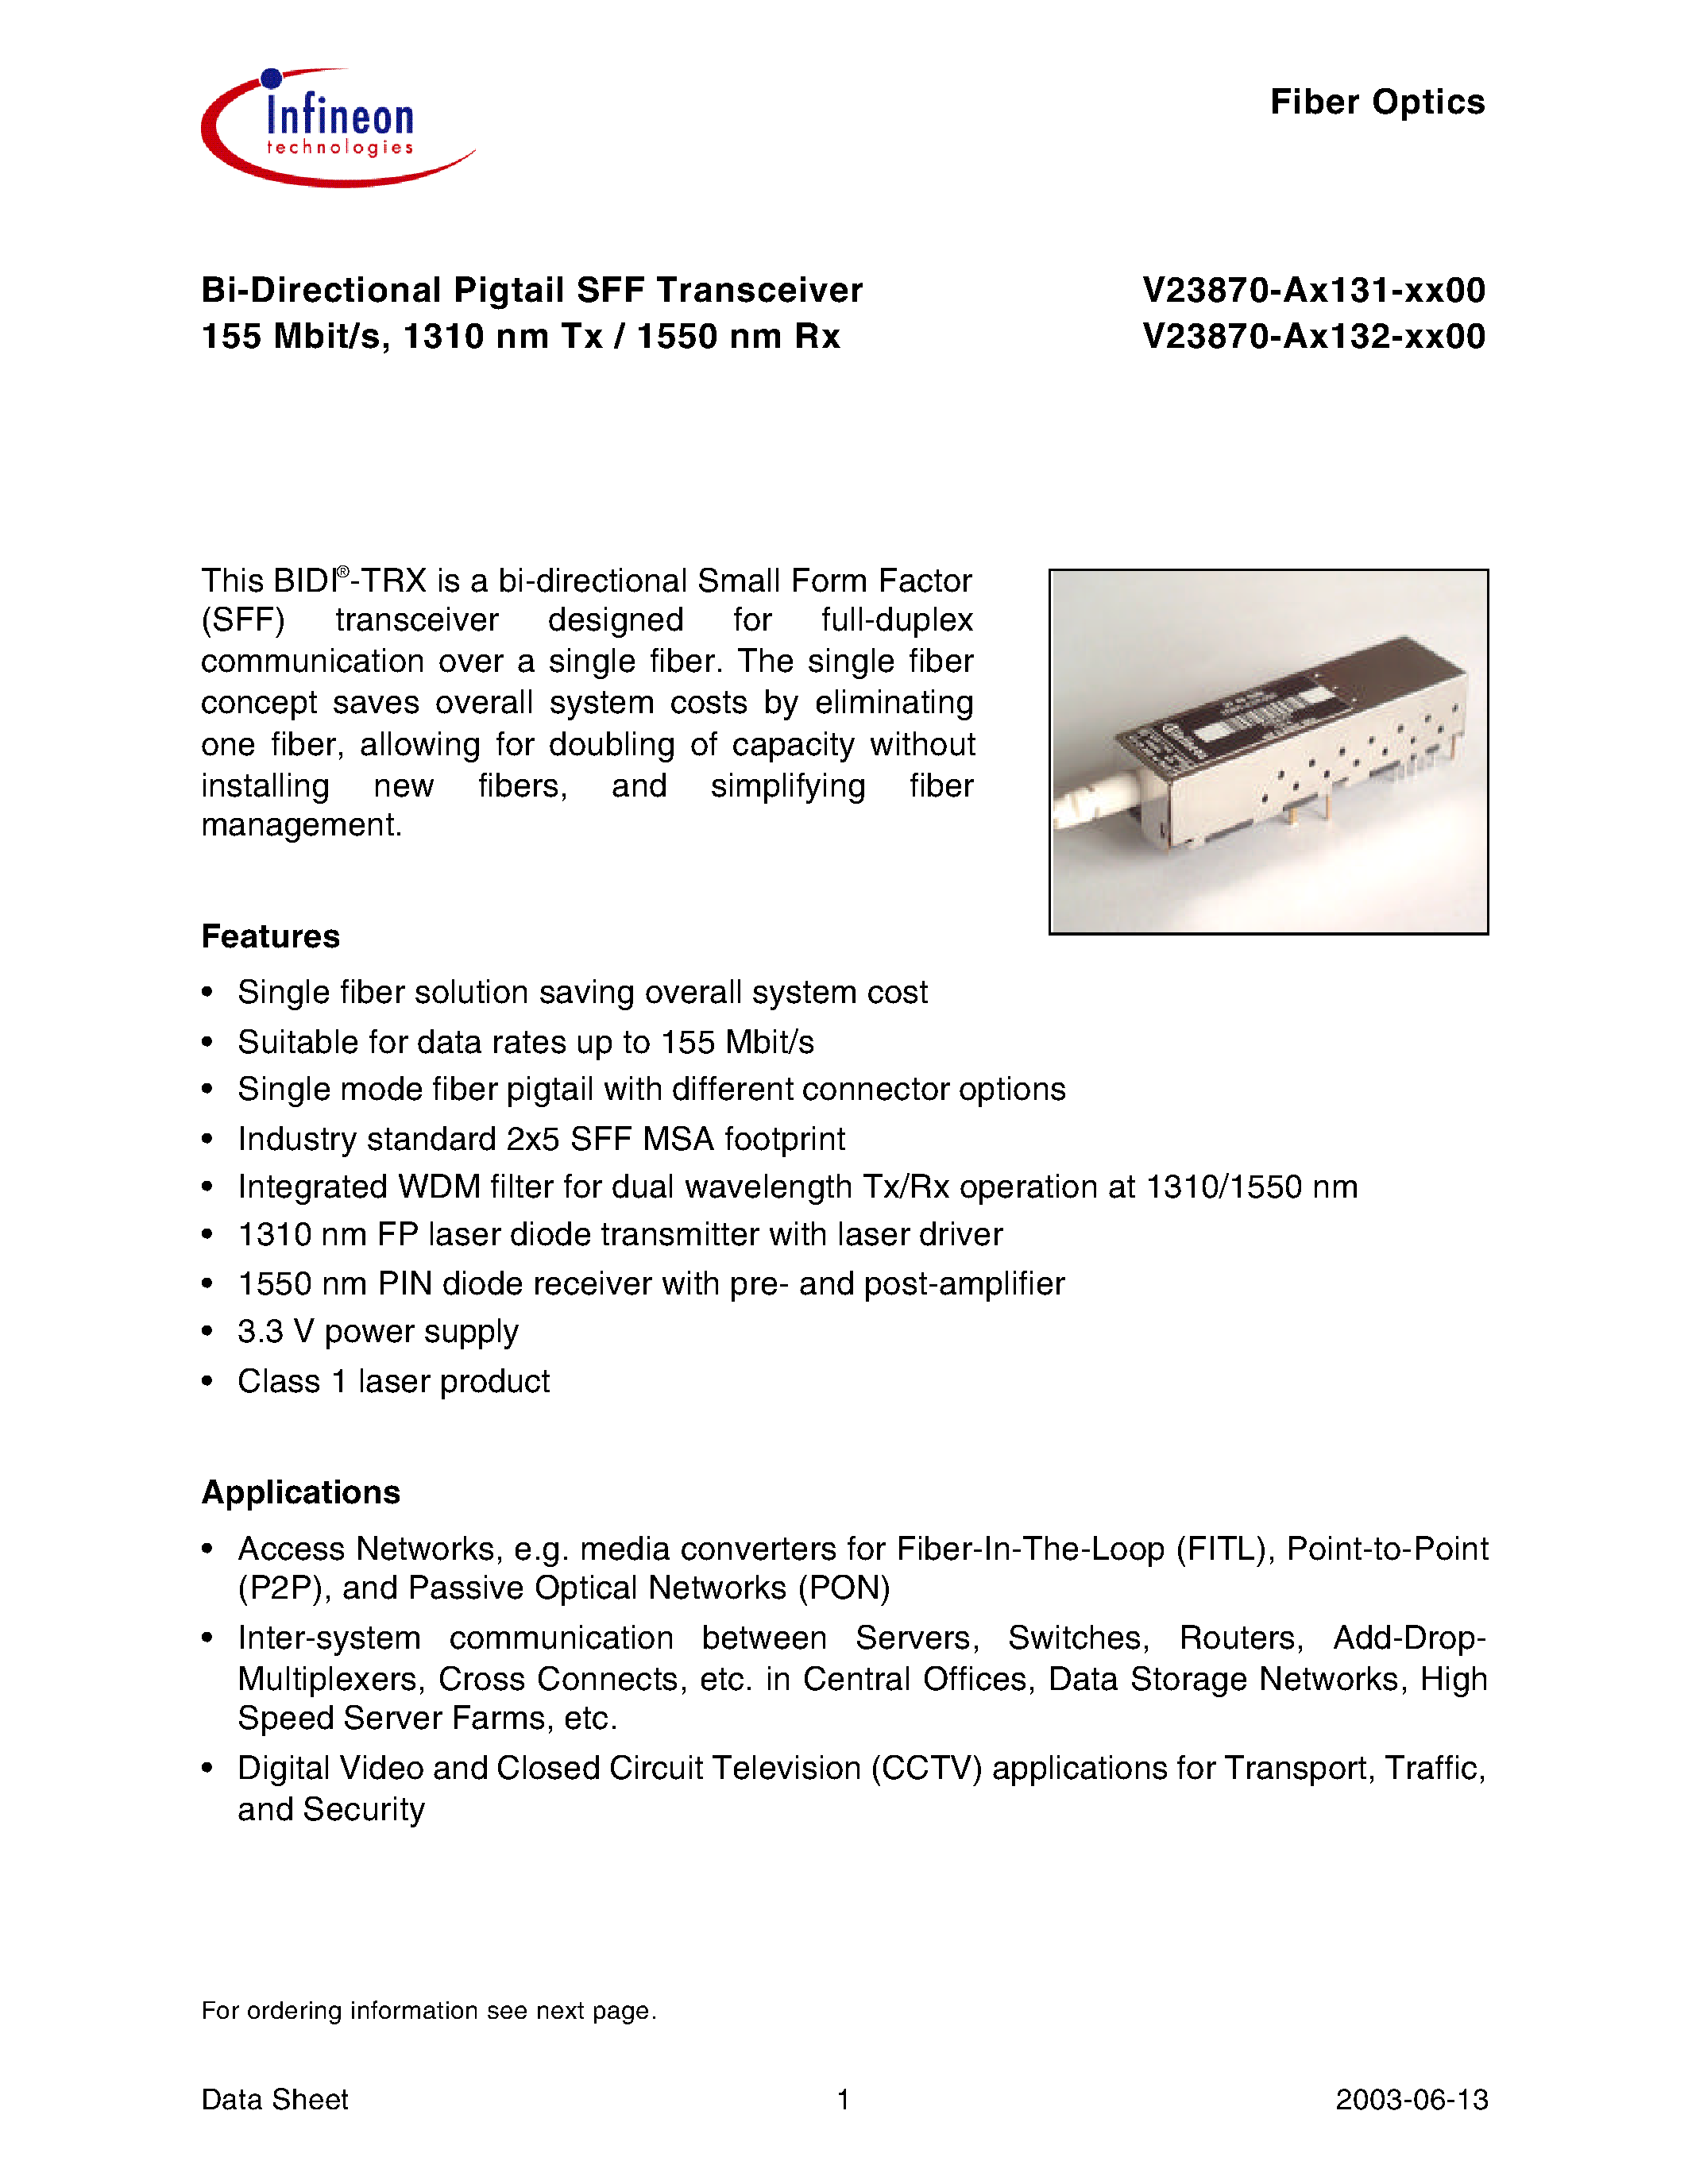 Datasheet V23870-A3131-K100 - Bi-Directional Pigtail SFF Transceiver 155 Mbit/s/ 1310 nm Tx / 1550 nm Rx page 1